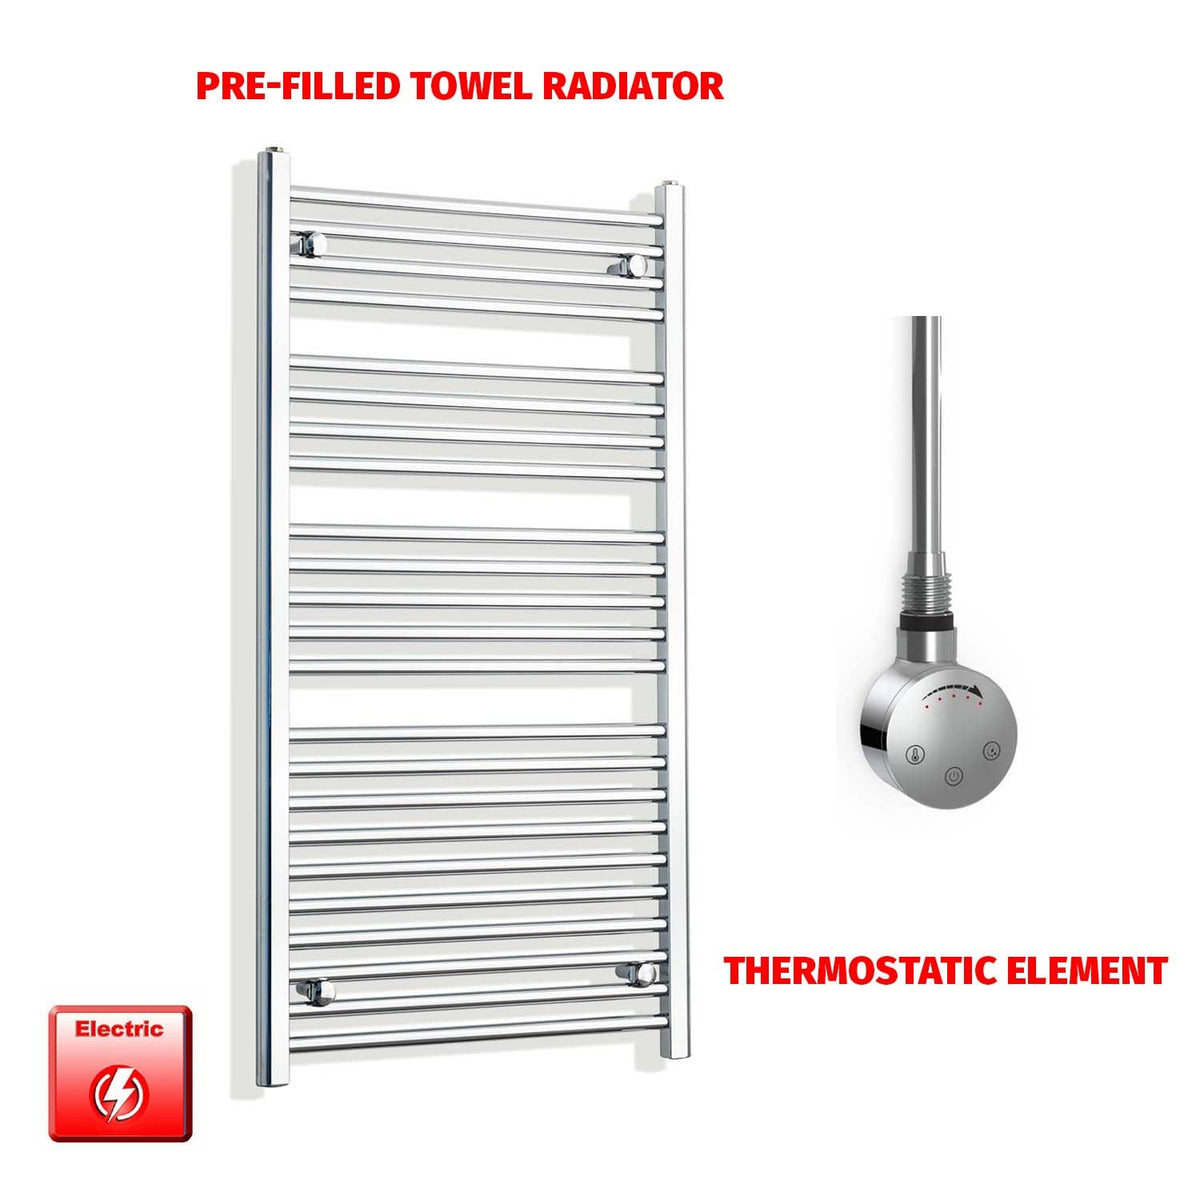 1200mm High 550mm Wide Pre-Filled Electric Heated Towel Radiator Chrome HTR SMR Thermostatic element no timer